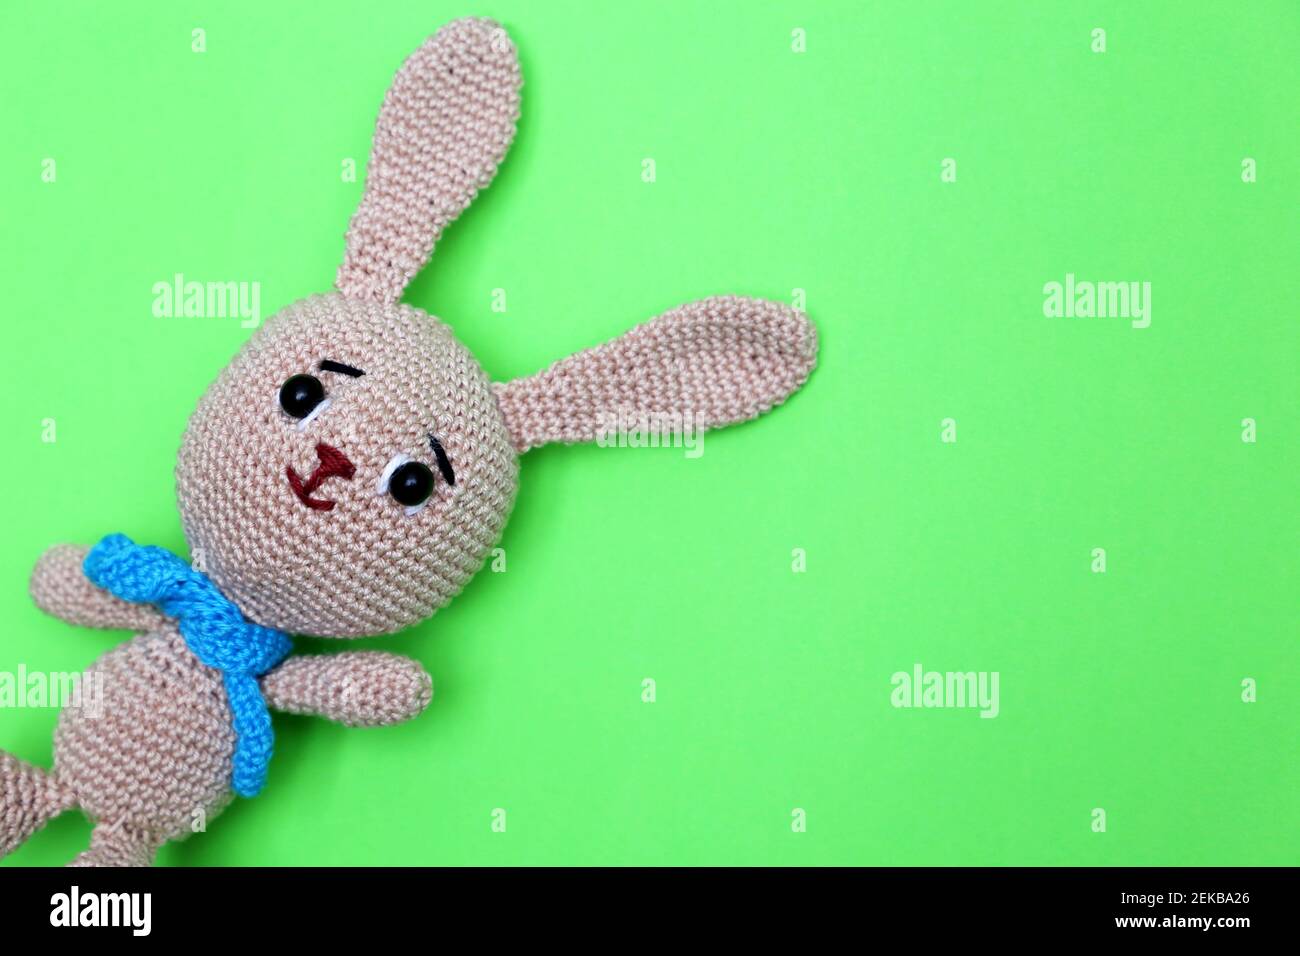 Easter Bunny on green background. Greeting card with knitted toy rabbit with free copy space Stock Photo